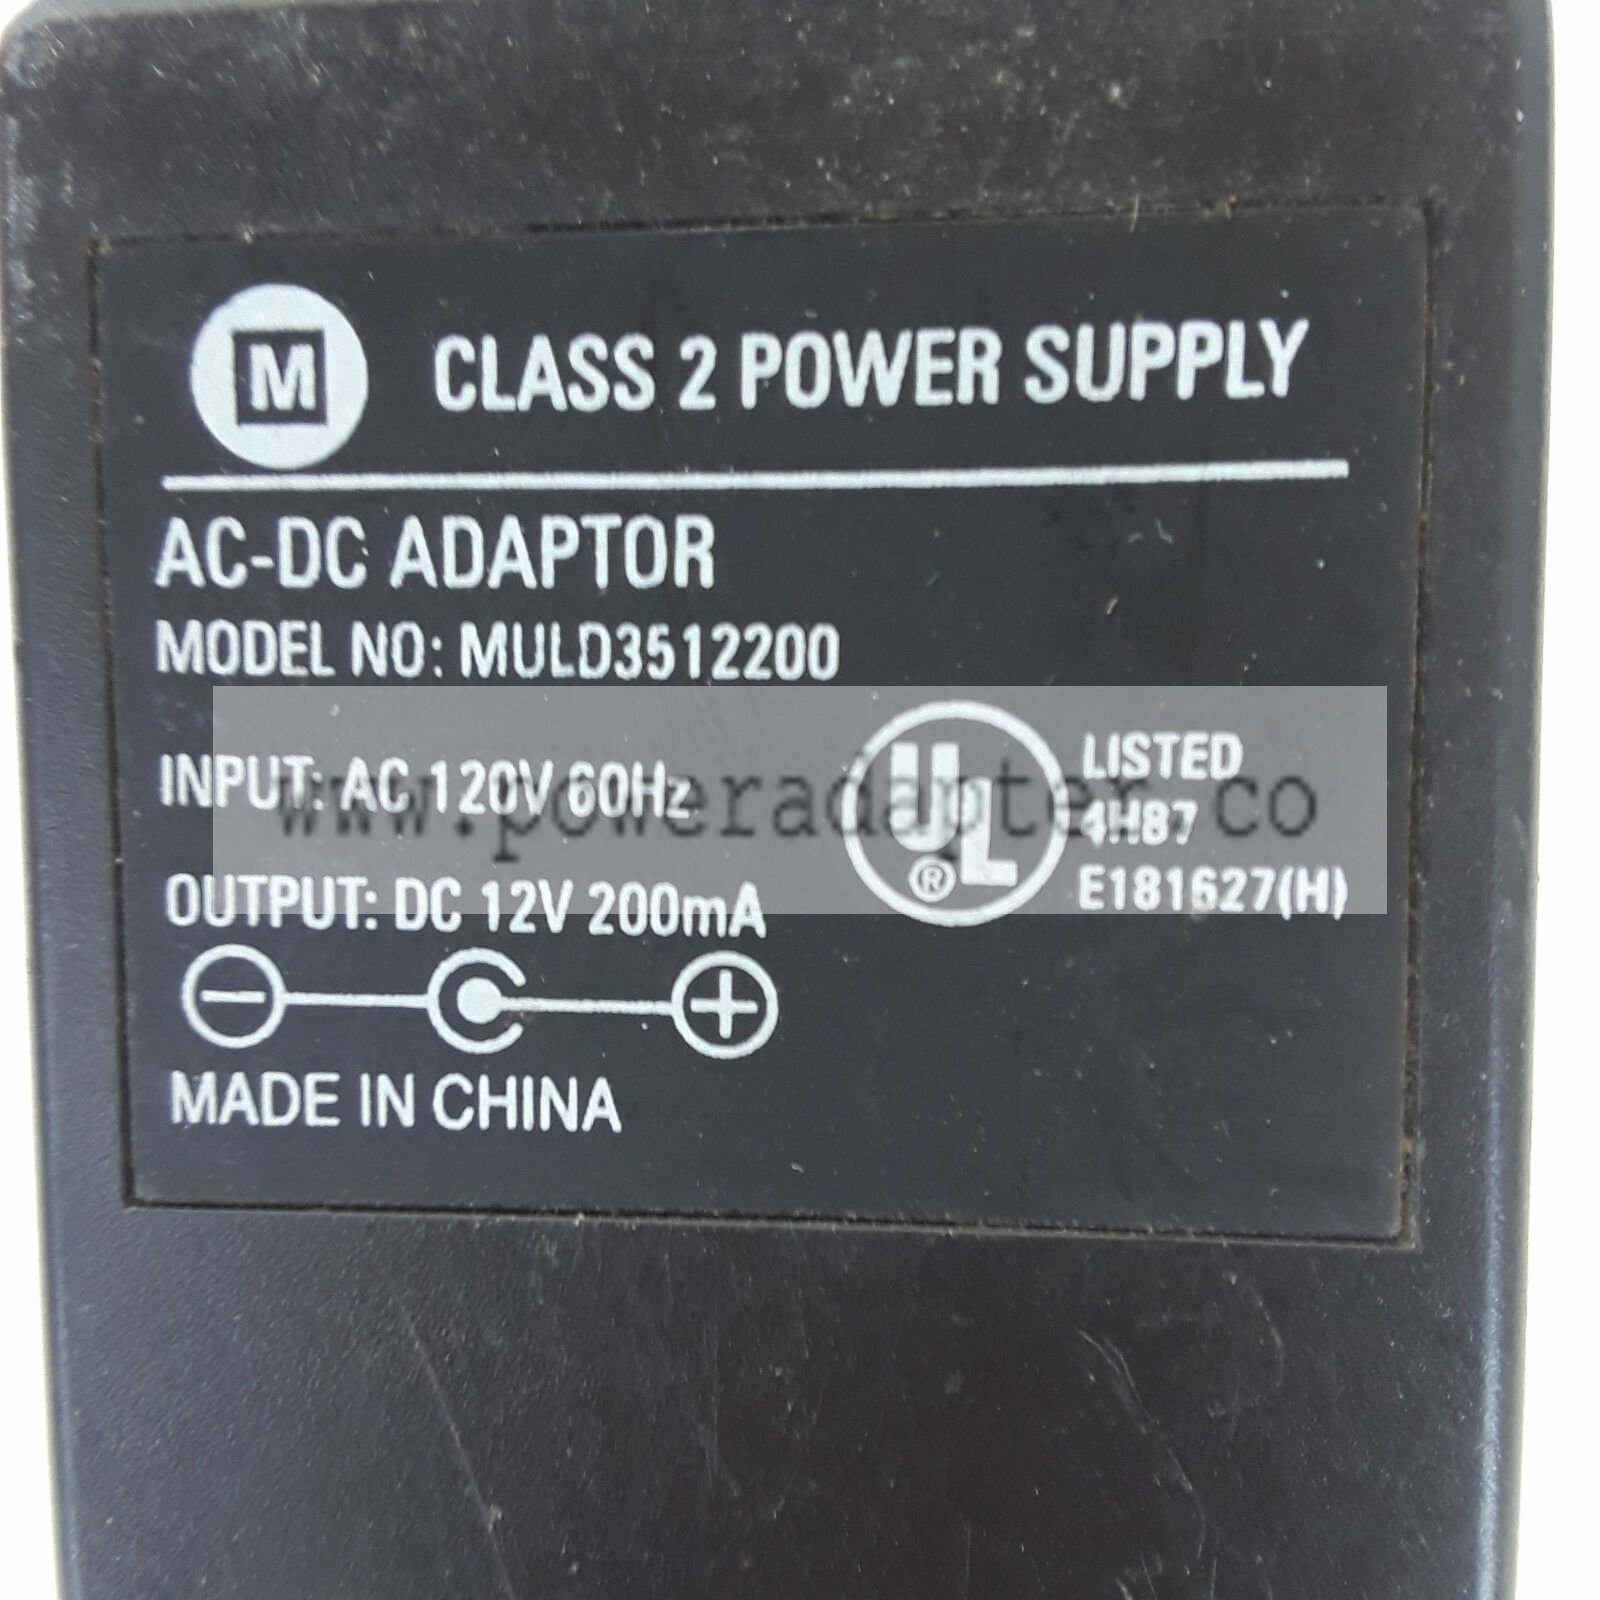 M Class 2 Power Supply Model MULD3512200 Output 12VDC 200mA Brand: M MPN: MULD3512200 UPC: Does Not Apply EA1065